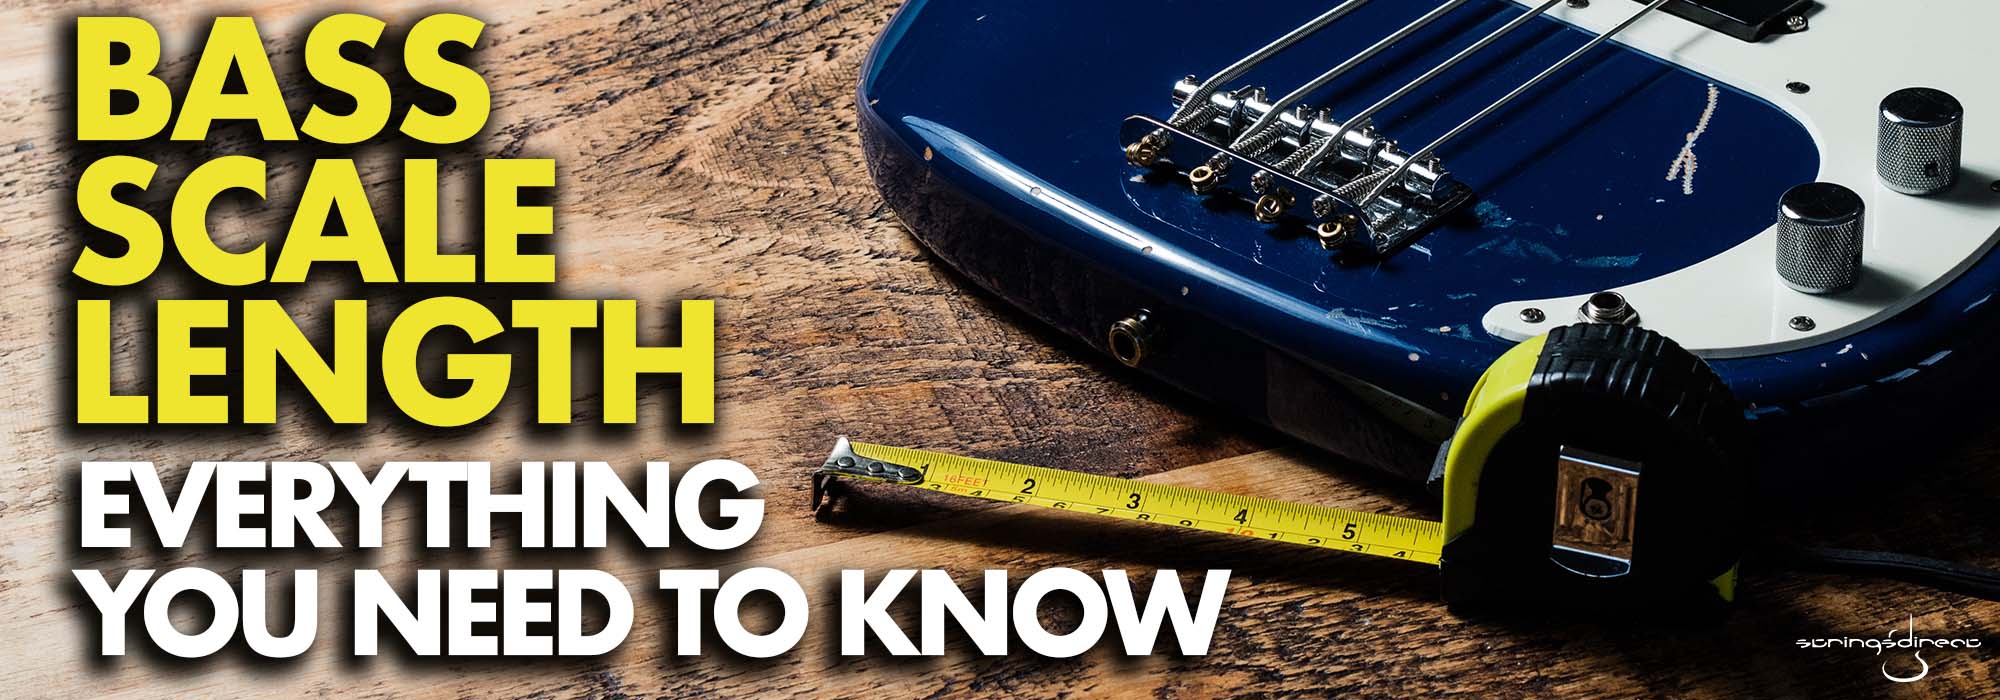 Bass Scale Length - What you need to know- Header Image